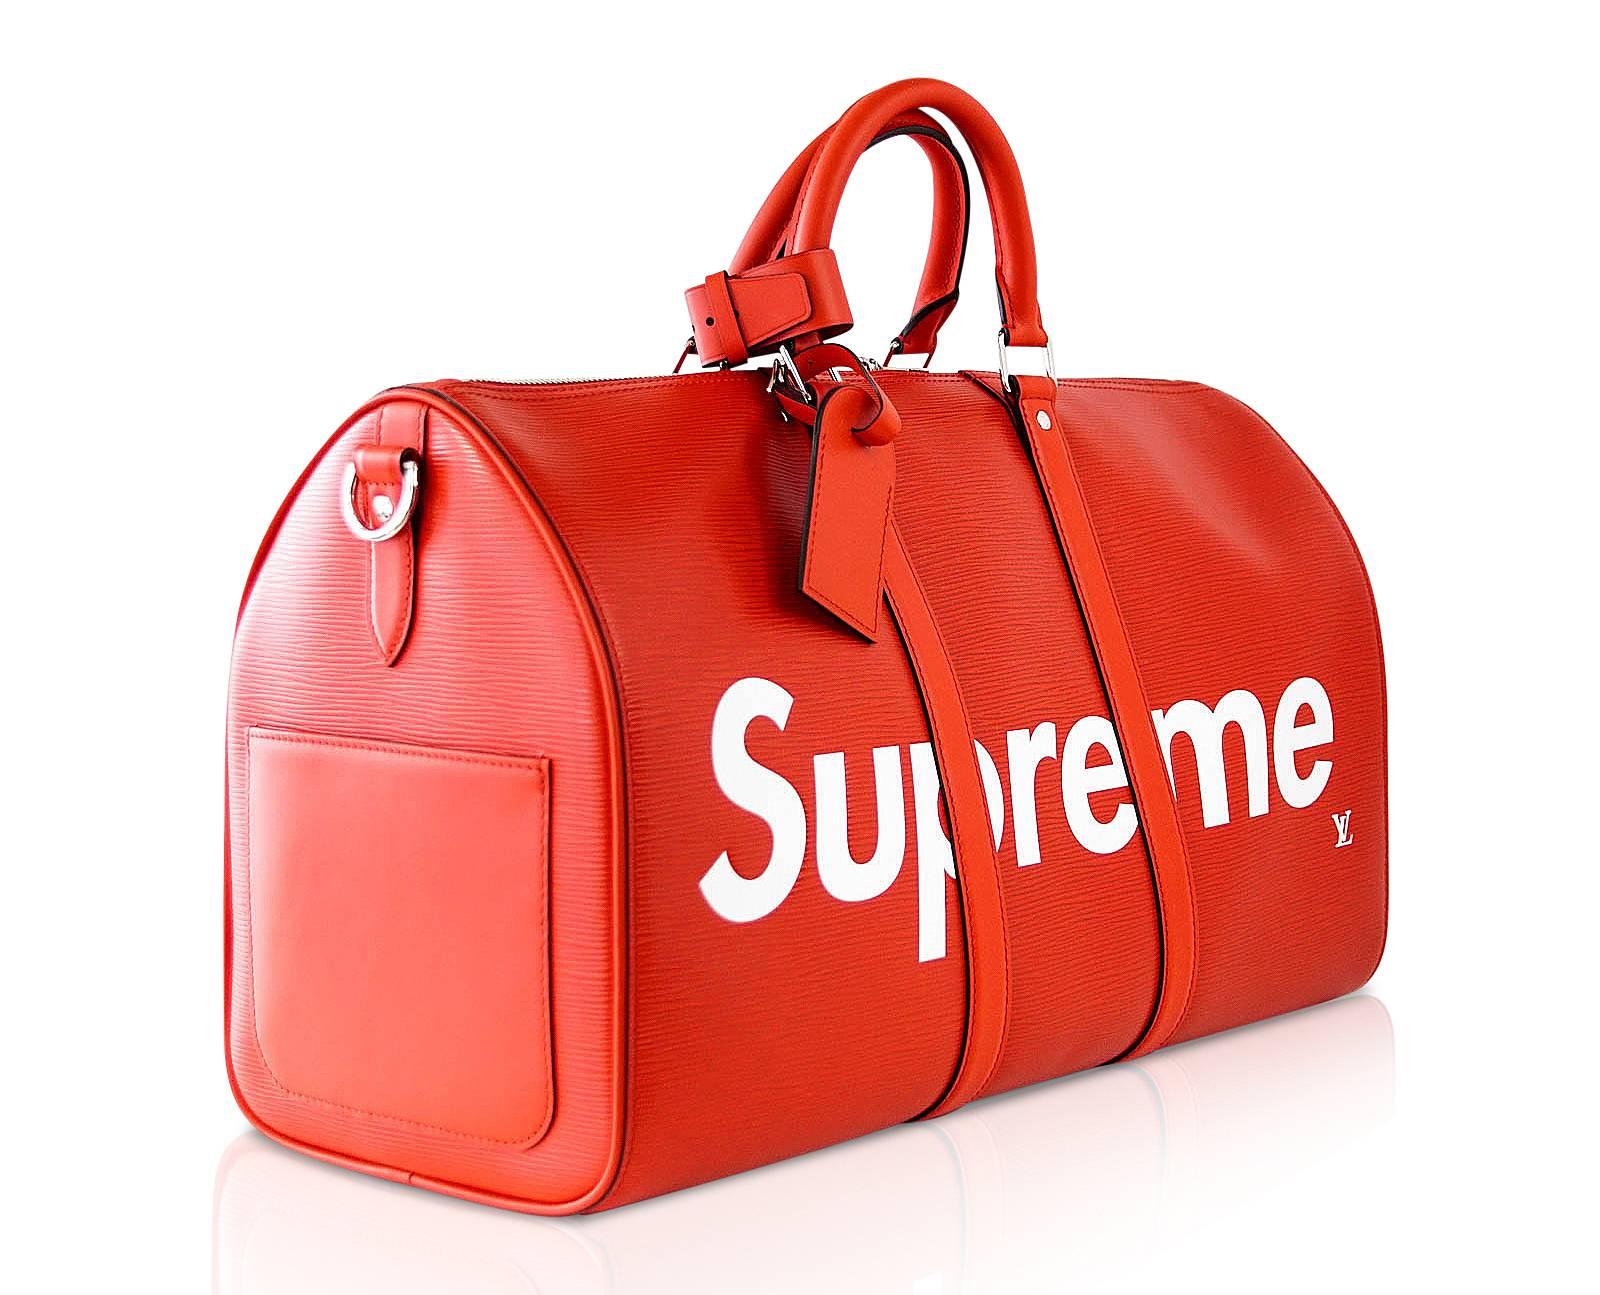 The jaw dropping Louis Vuitton x Supreme Collaboration is finally here   TASTEMAKER COLLECTIVE MEDIA